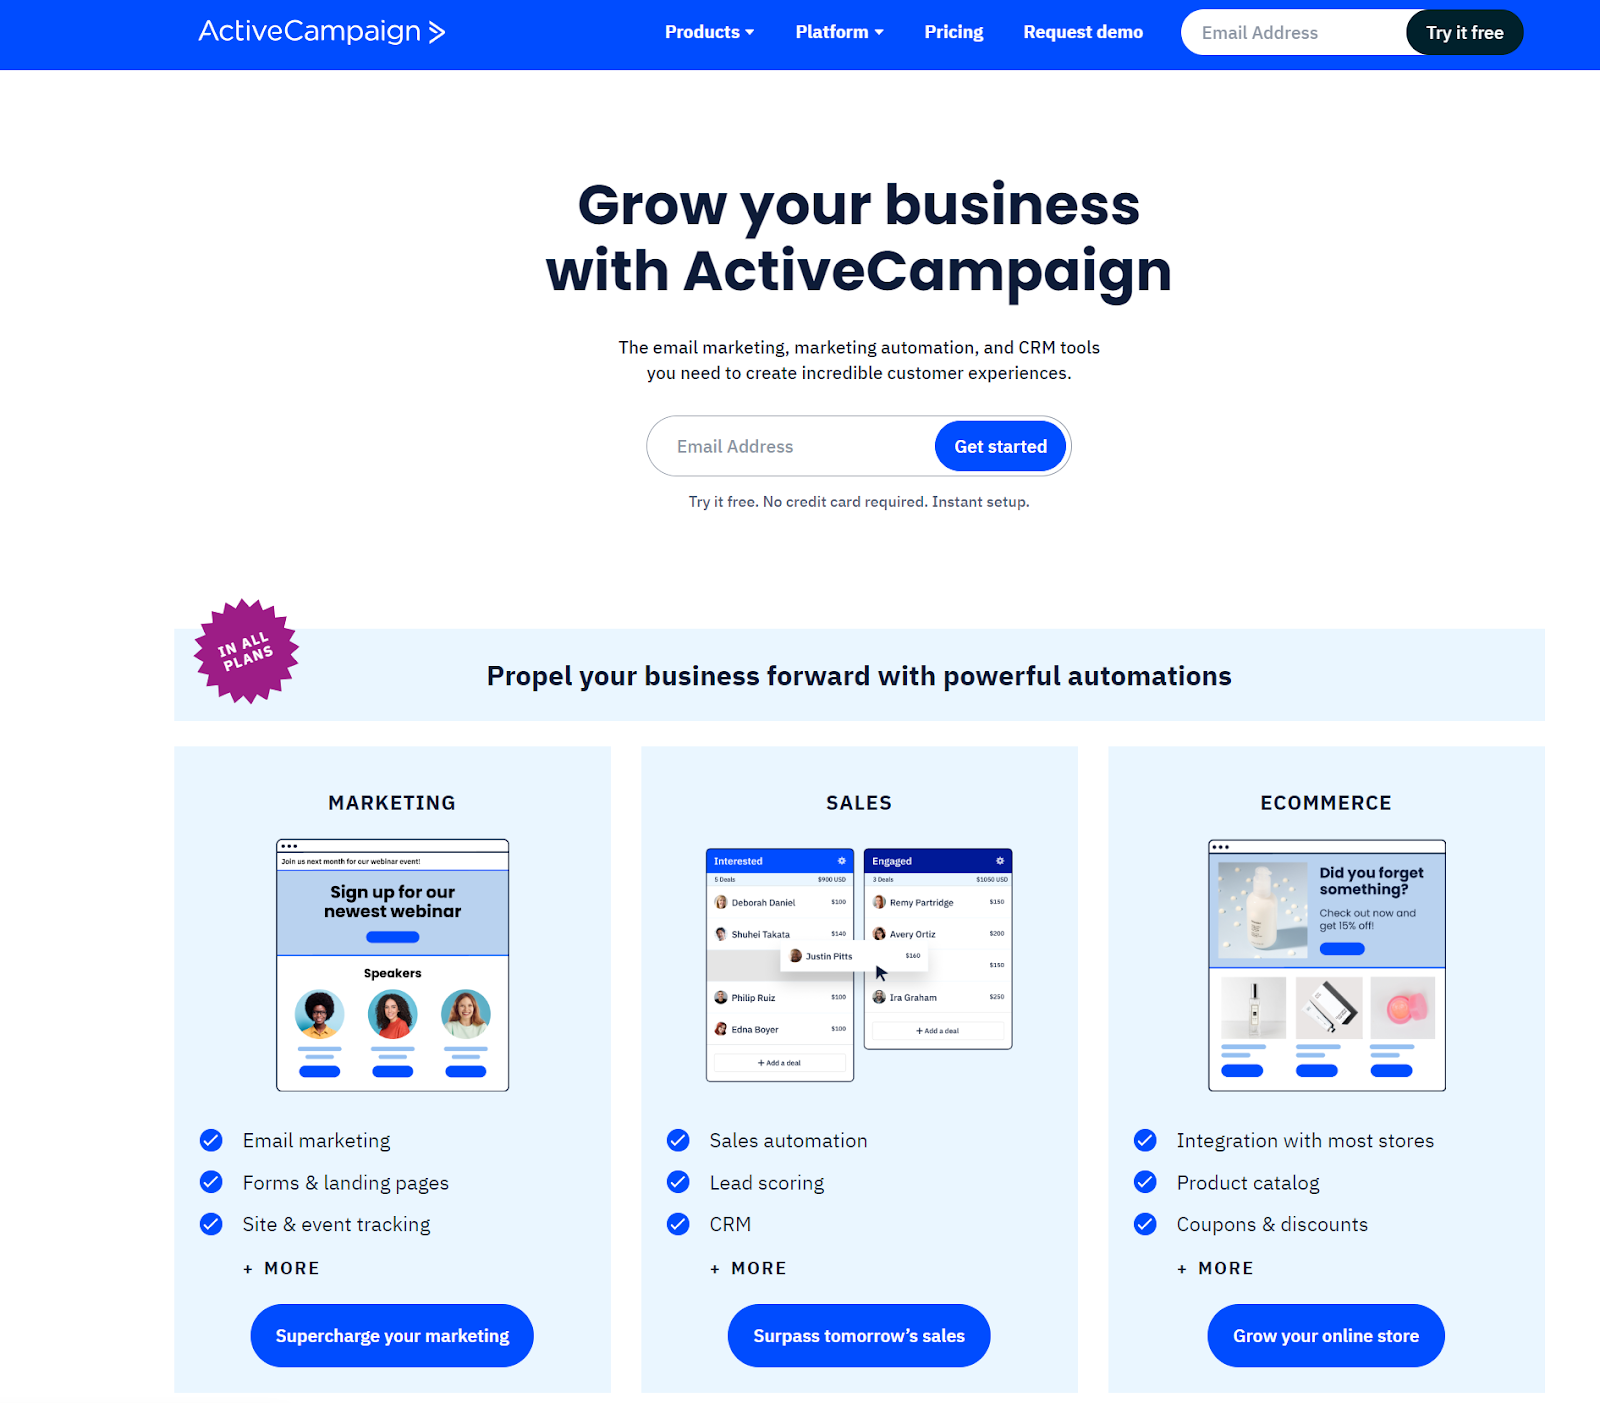 ActiveCampaign homepage